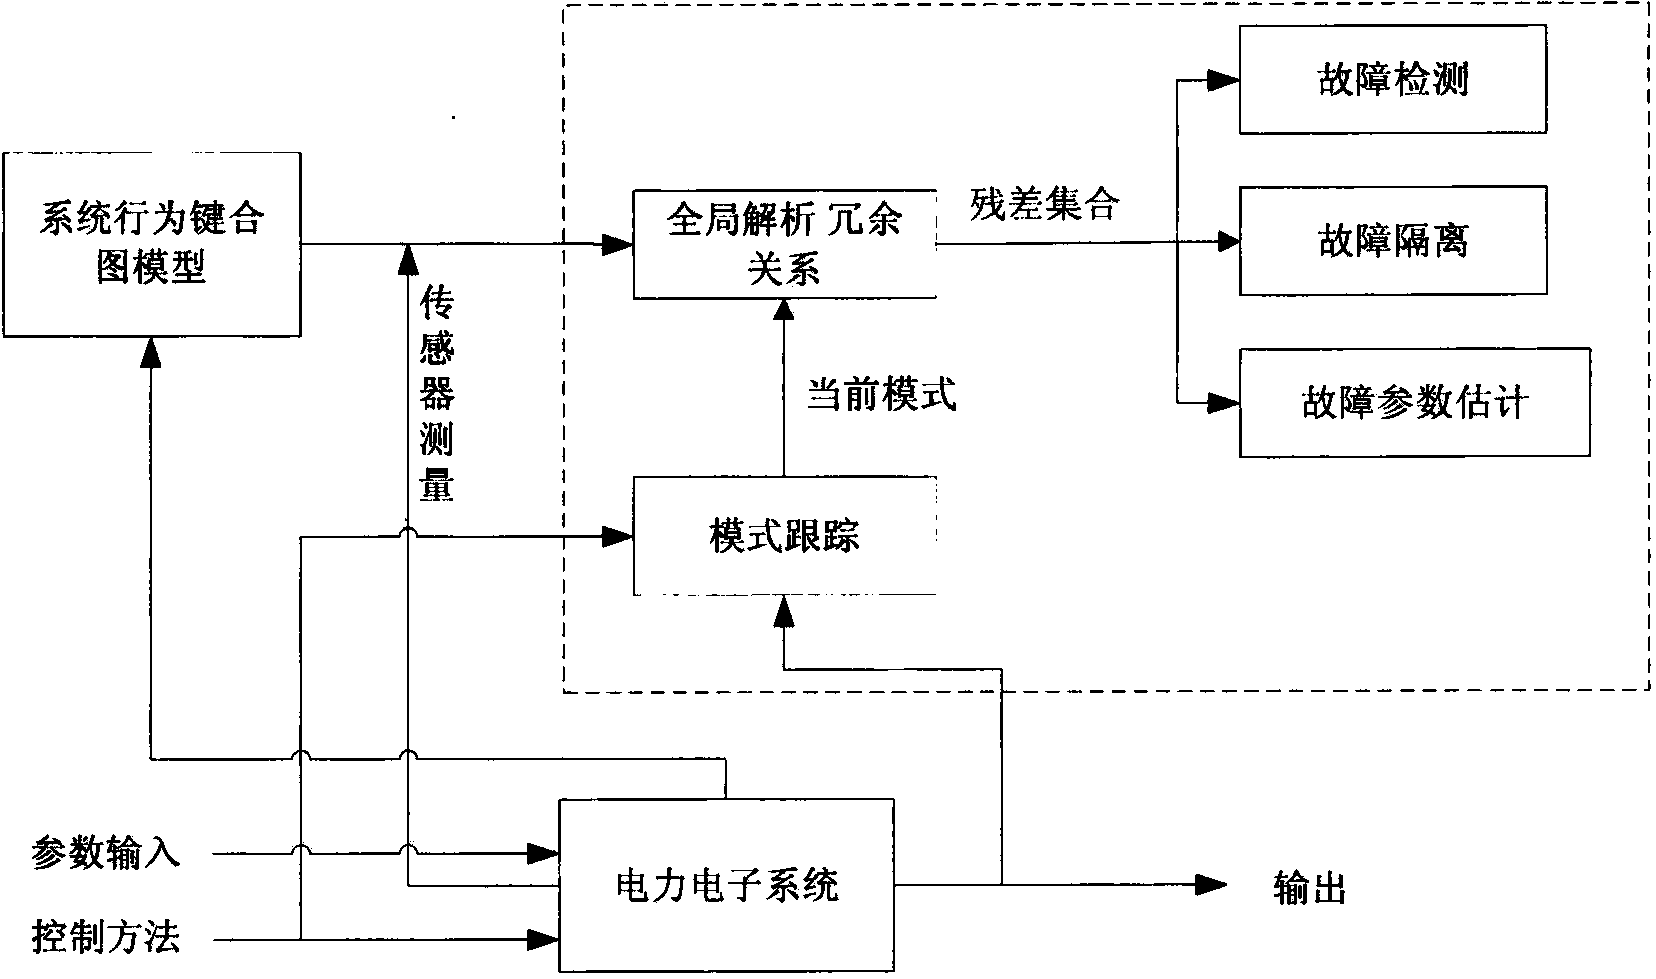 Power electronic system fault diagnosis method based on bond graph